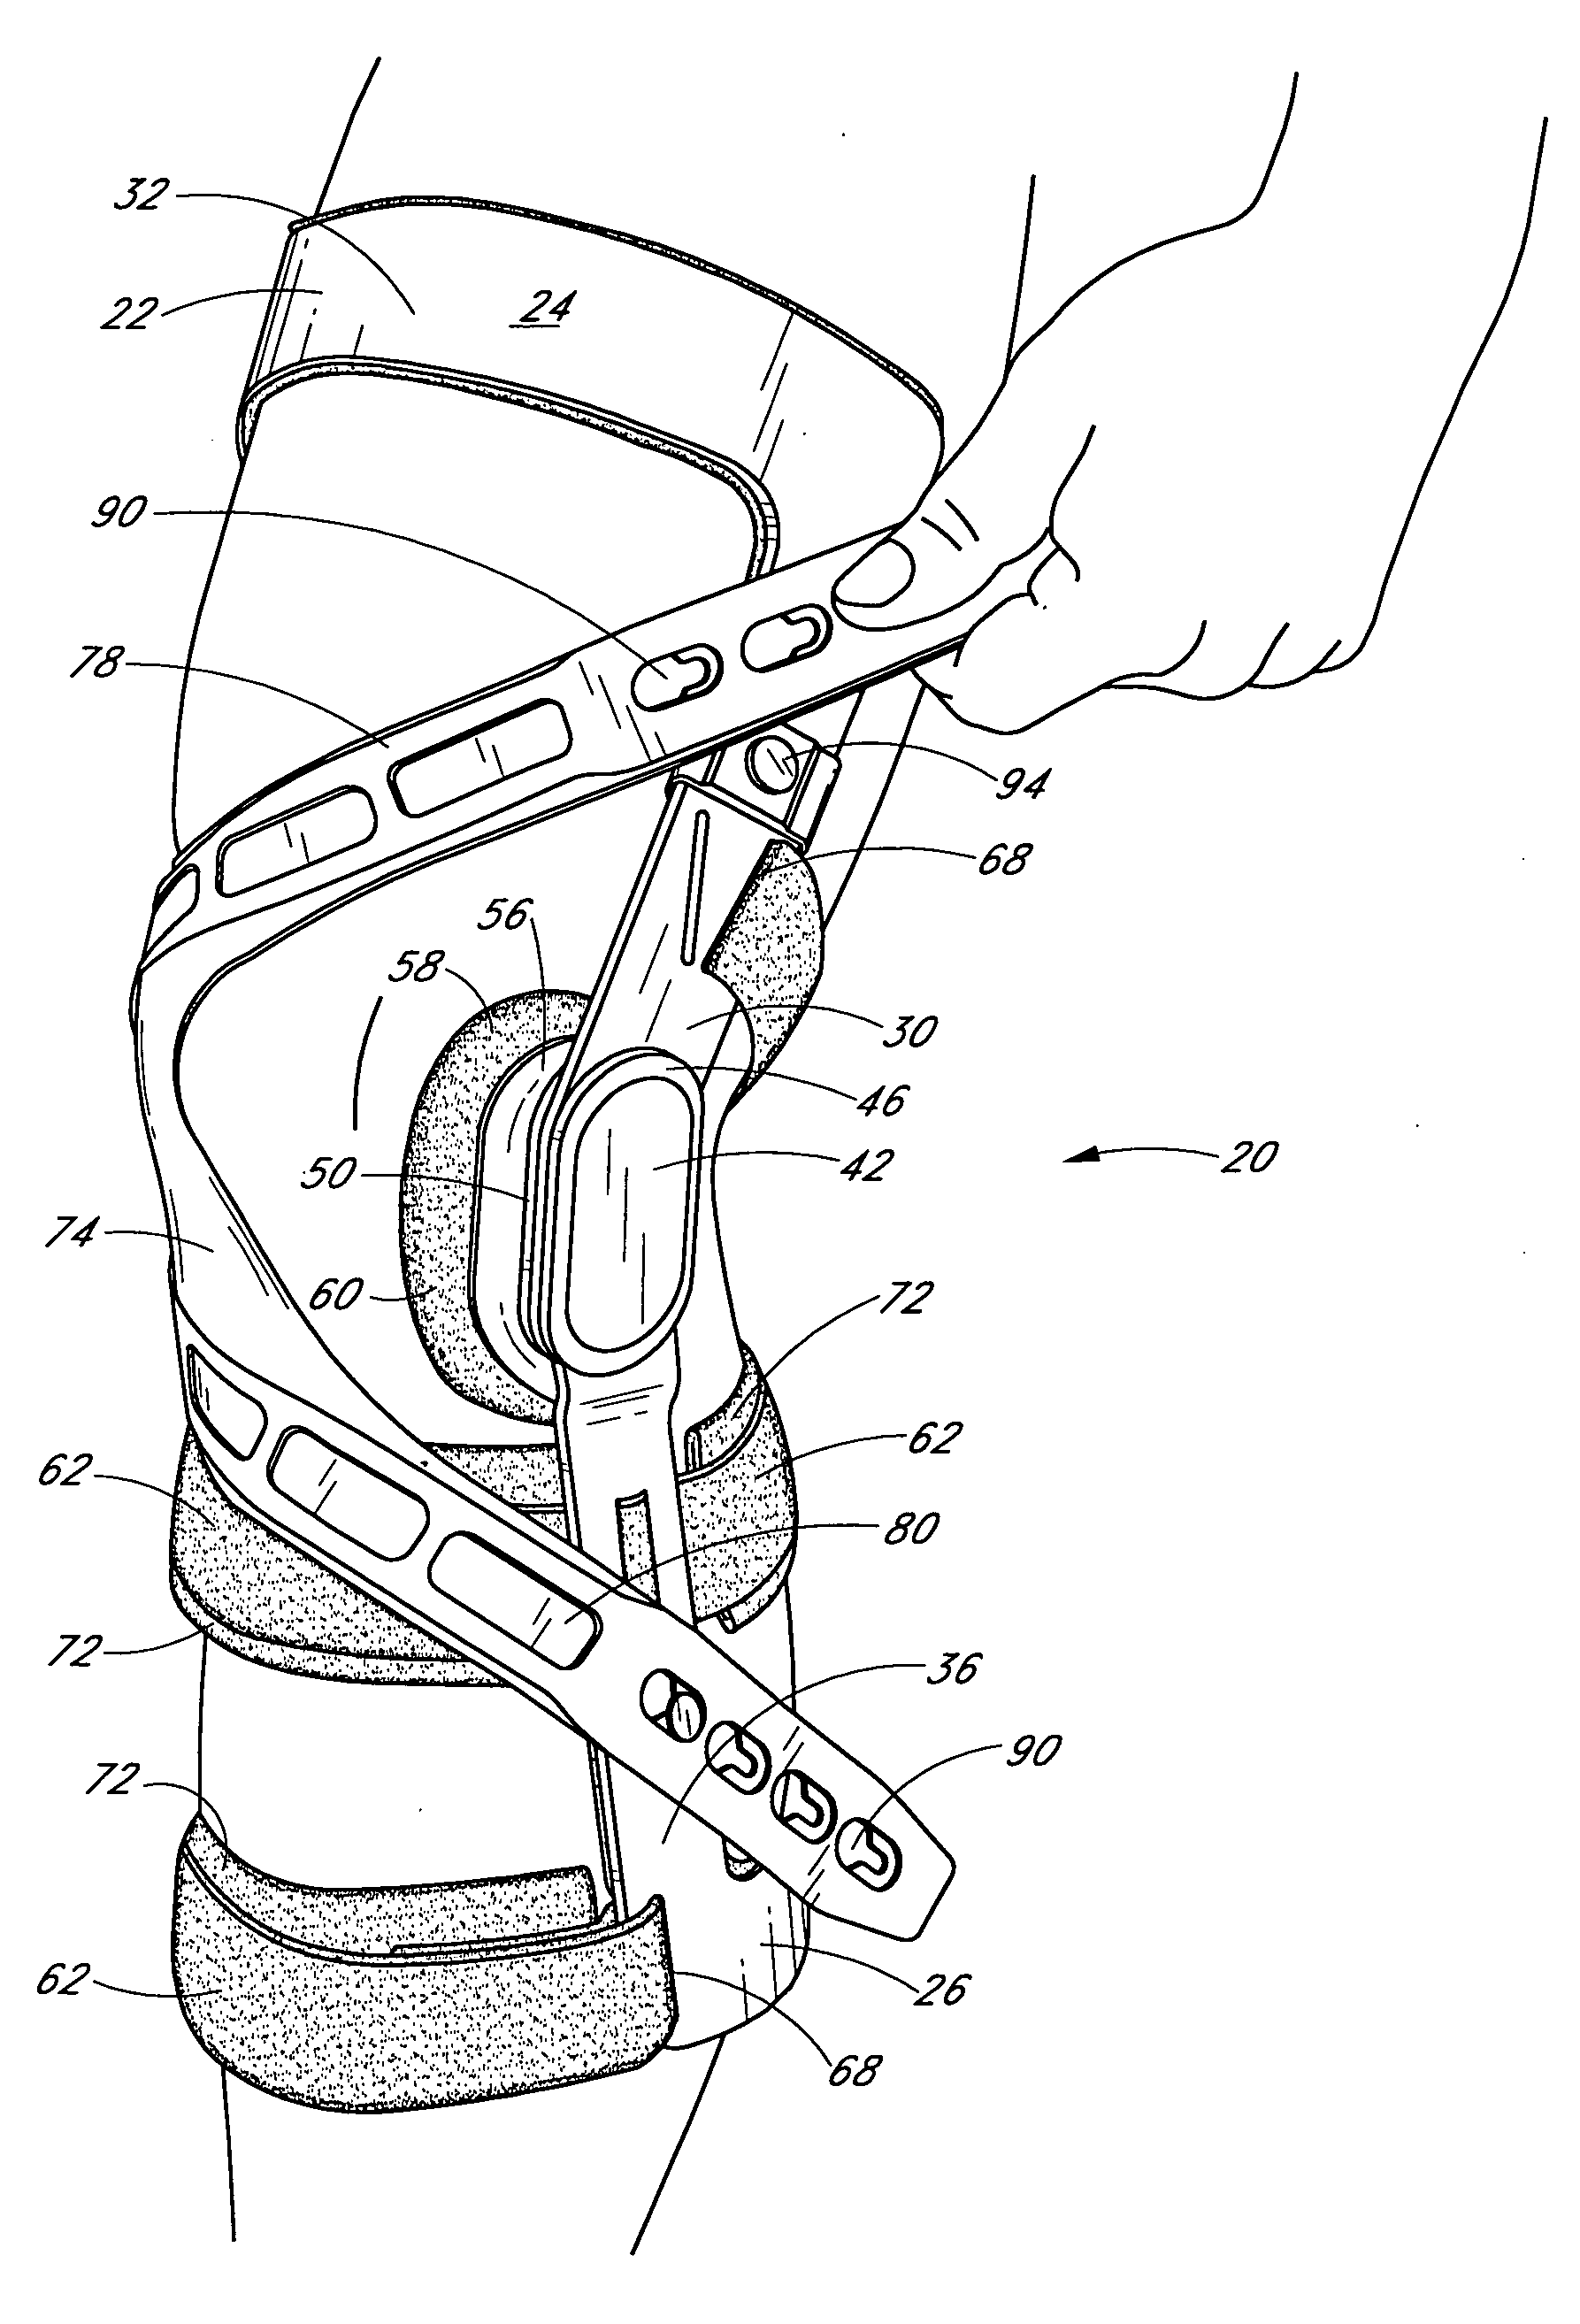 Knee brace having a rigid frame and patellofemoral support